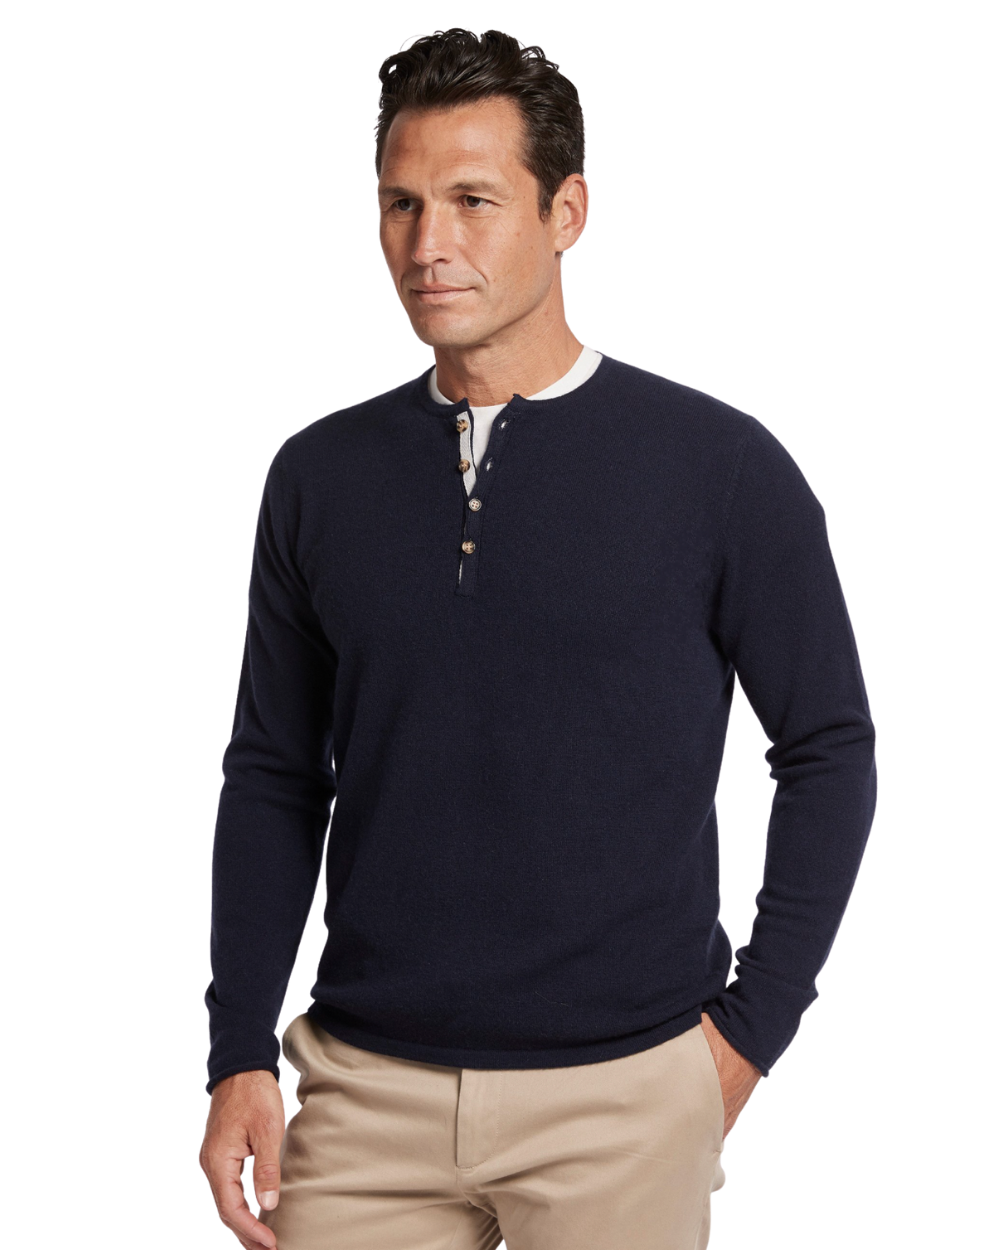 Cashmere Henley-50% OFF at Checkout!